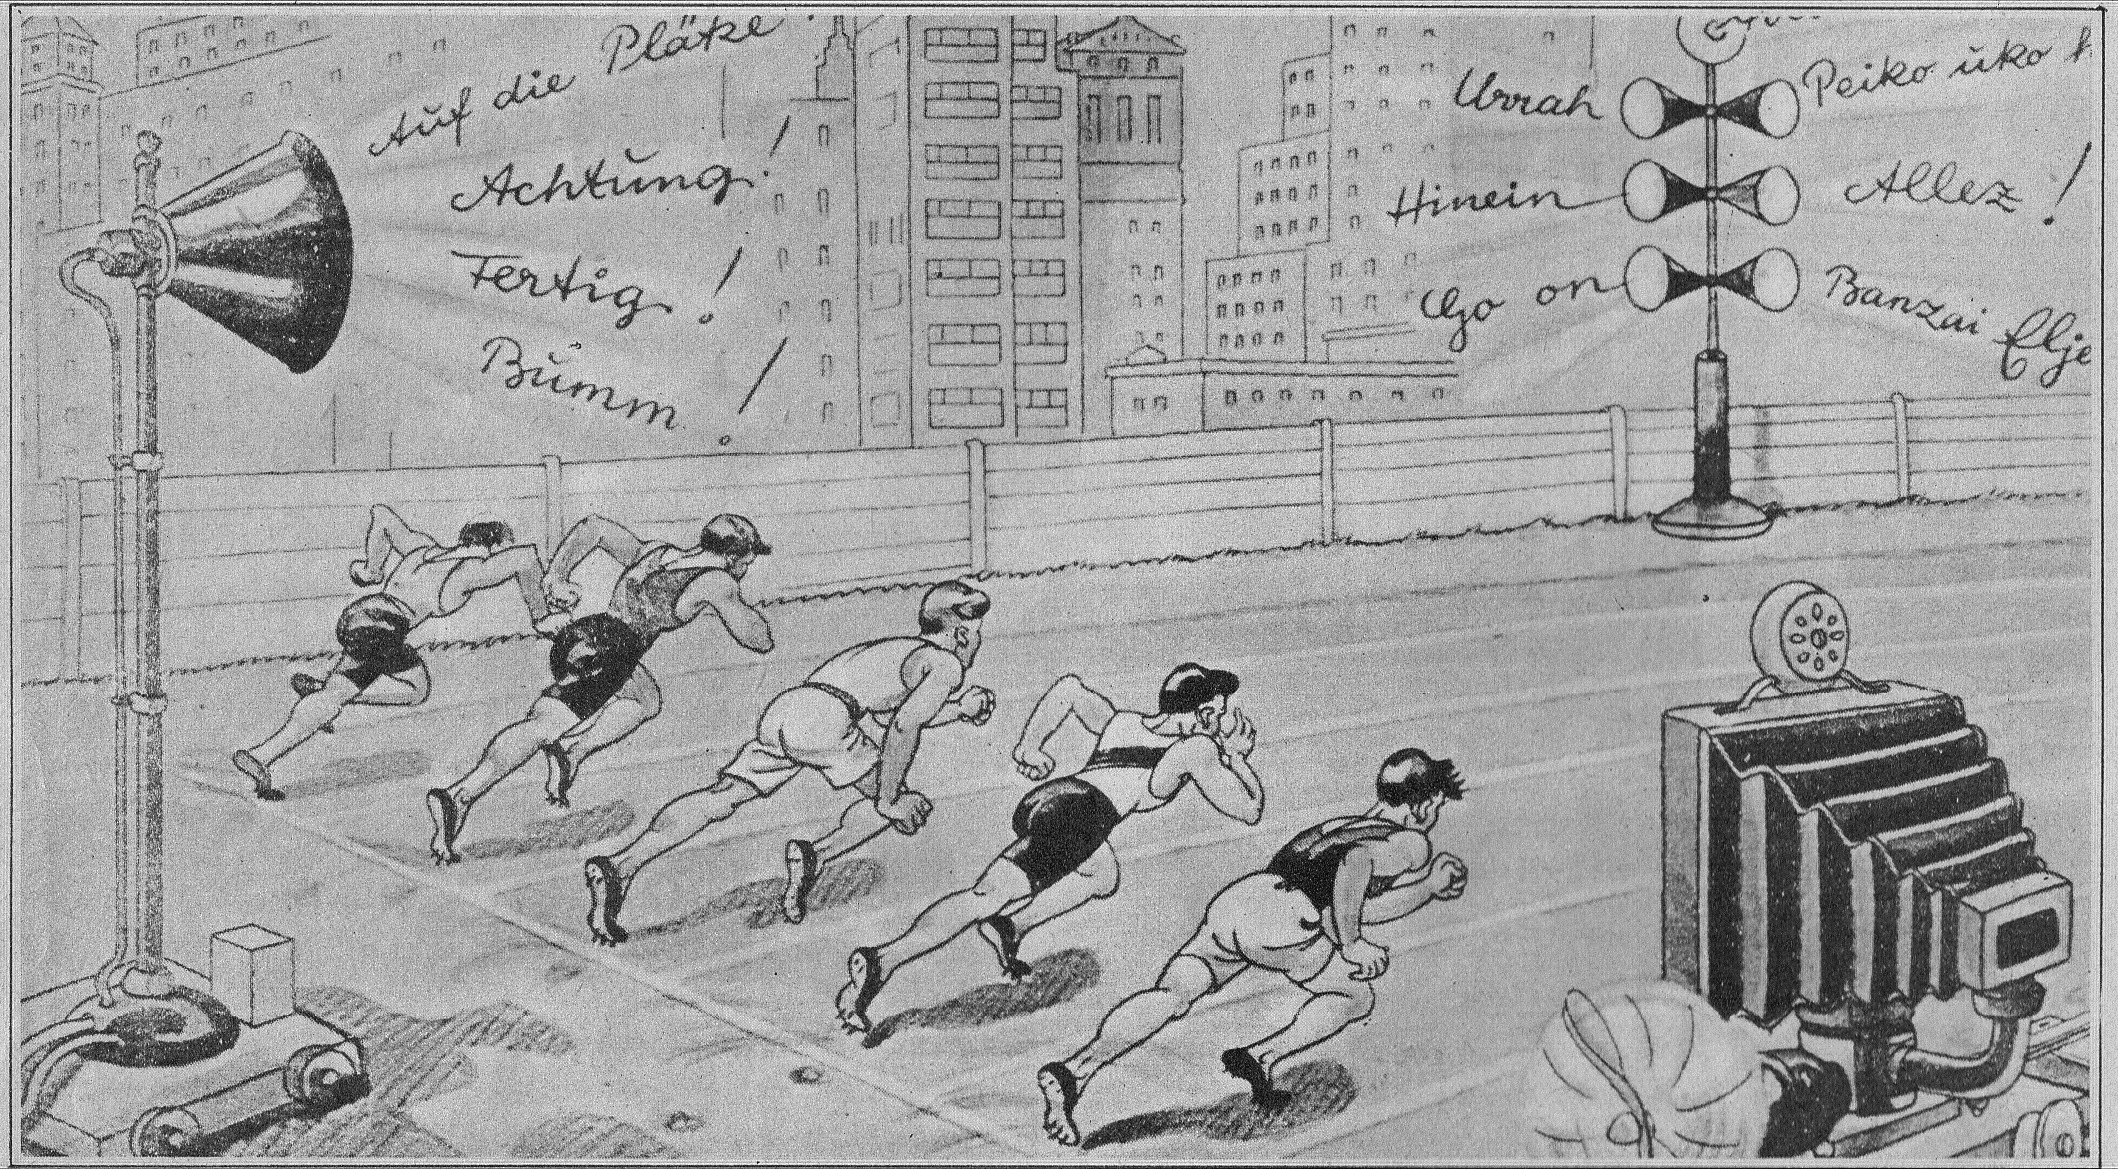 drawn people running in the Olympics